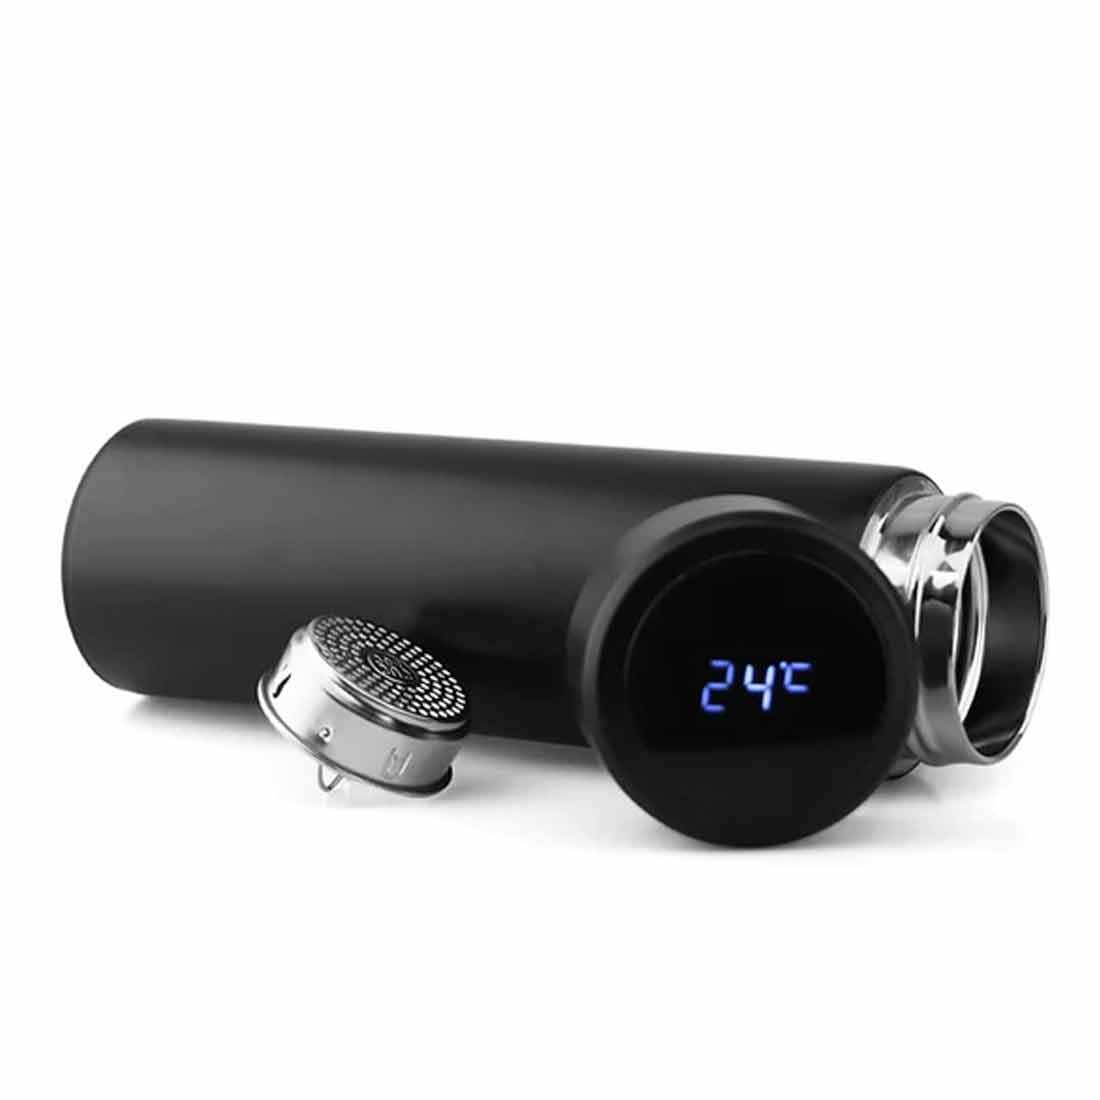 Customized Coffee Thermos Tumbler Flask Personalized Gift for Doctors With Temperature Display- DR